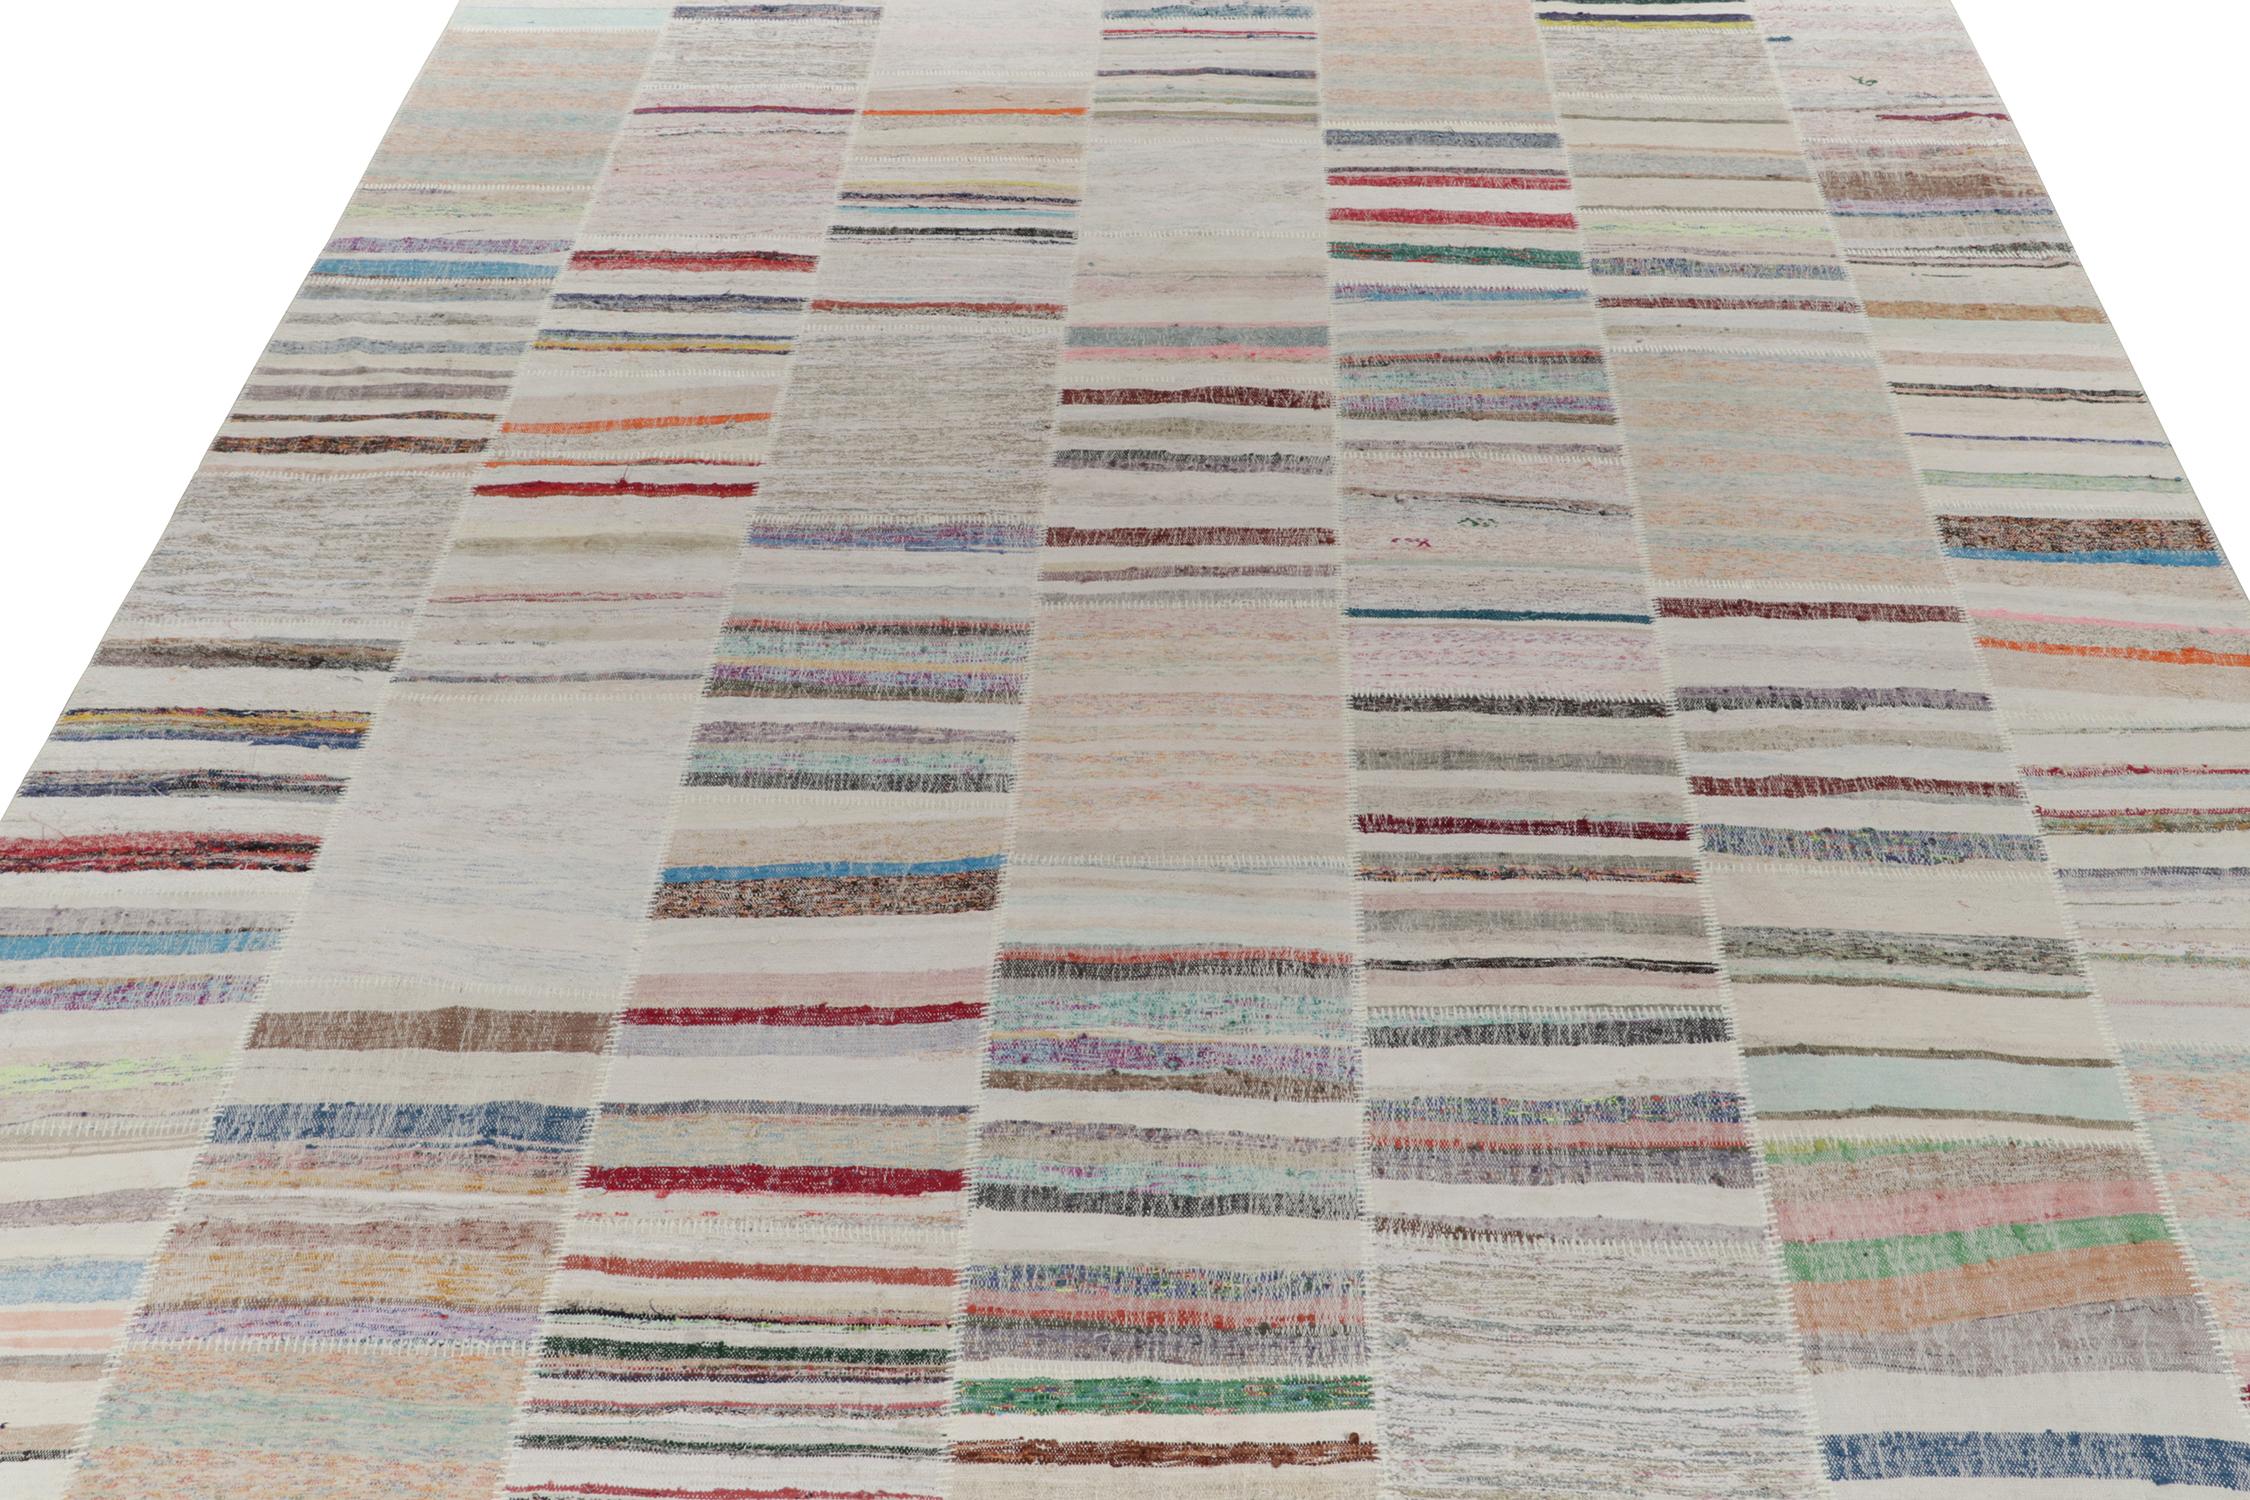 Rug & Kilim takes pride in presenting its artistic vision of patchwork kilim that reimagines vintage yarns into unique pieces of art. This 12x15 flatweave features a striated pattern that lends a smooth sense of movement in variegated shades across